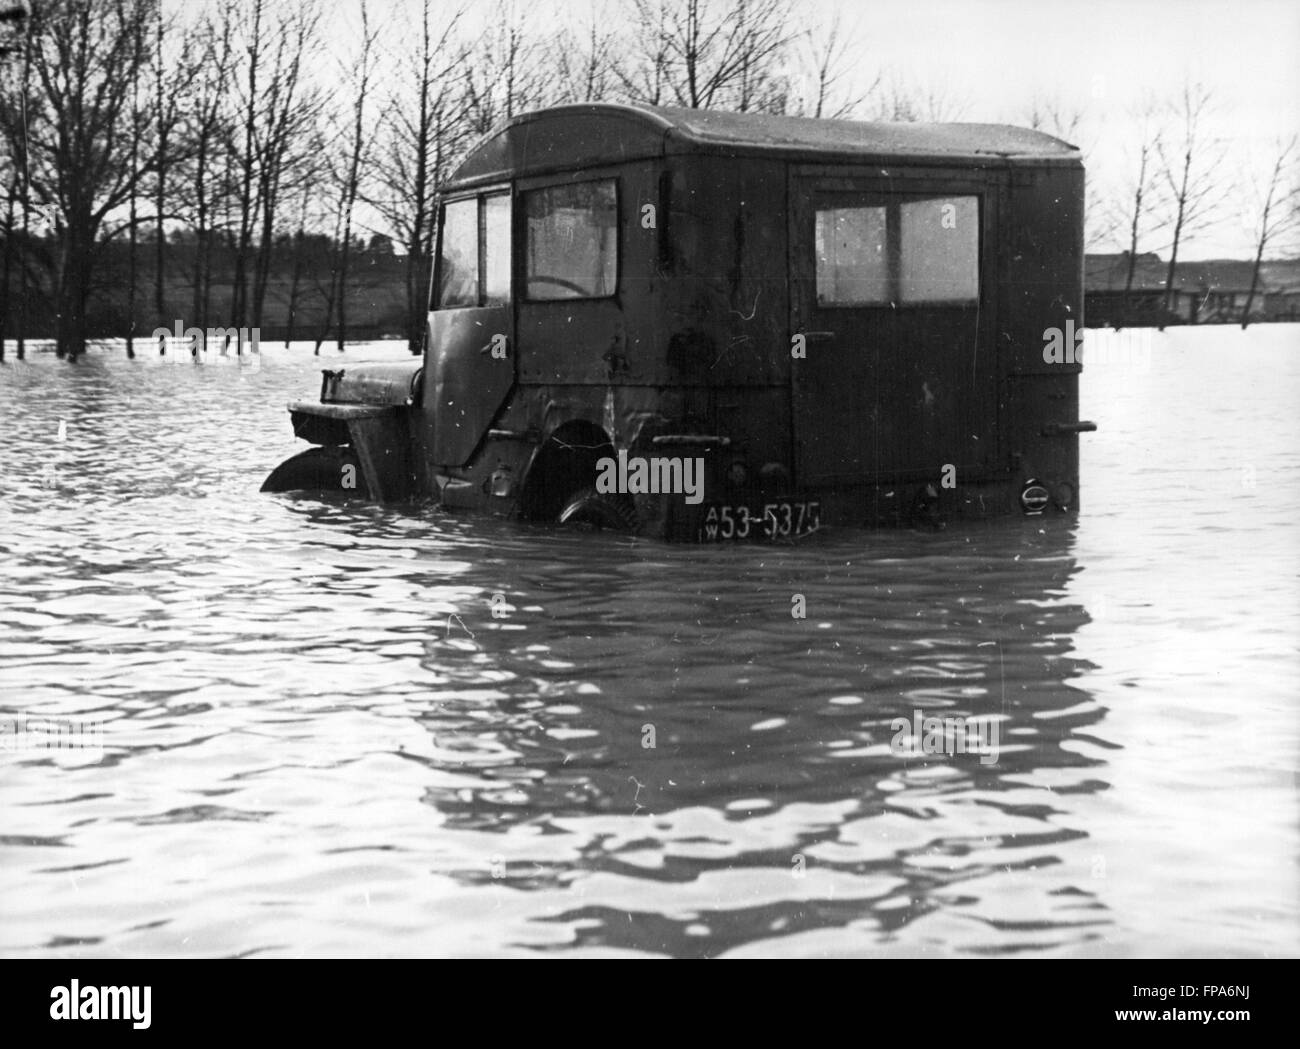 1962 - This Jeep was the Surprised by the floods: Since Saturday the Rot -Burr-dwellings of the city of Ulm are submerged. The population, mostly refuges, had to leave their homes by police regulation, saving only the most necessary articals of daily life. © Keystone Pictures USA/ZUMAPRESS.com/Alamy Live News Stock Photo